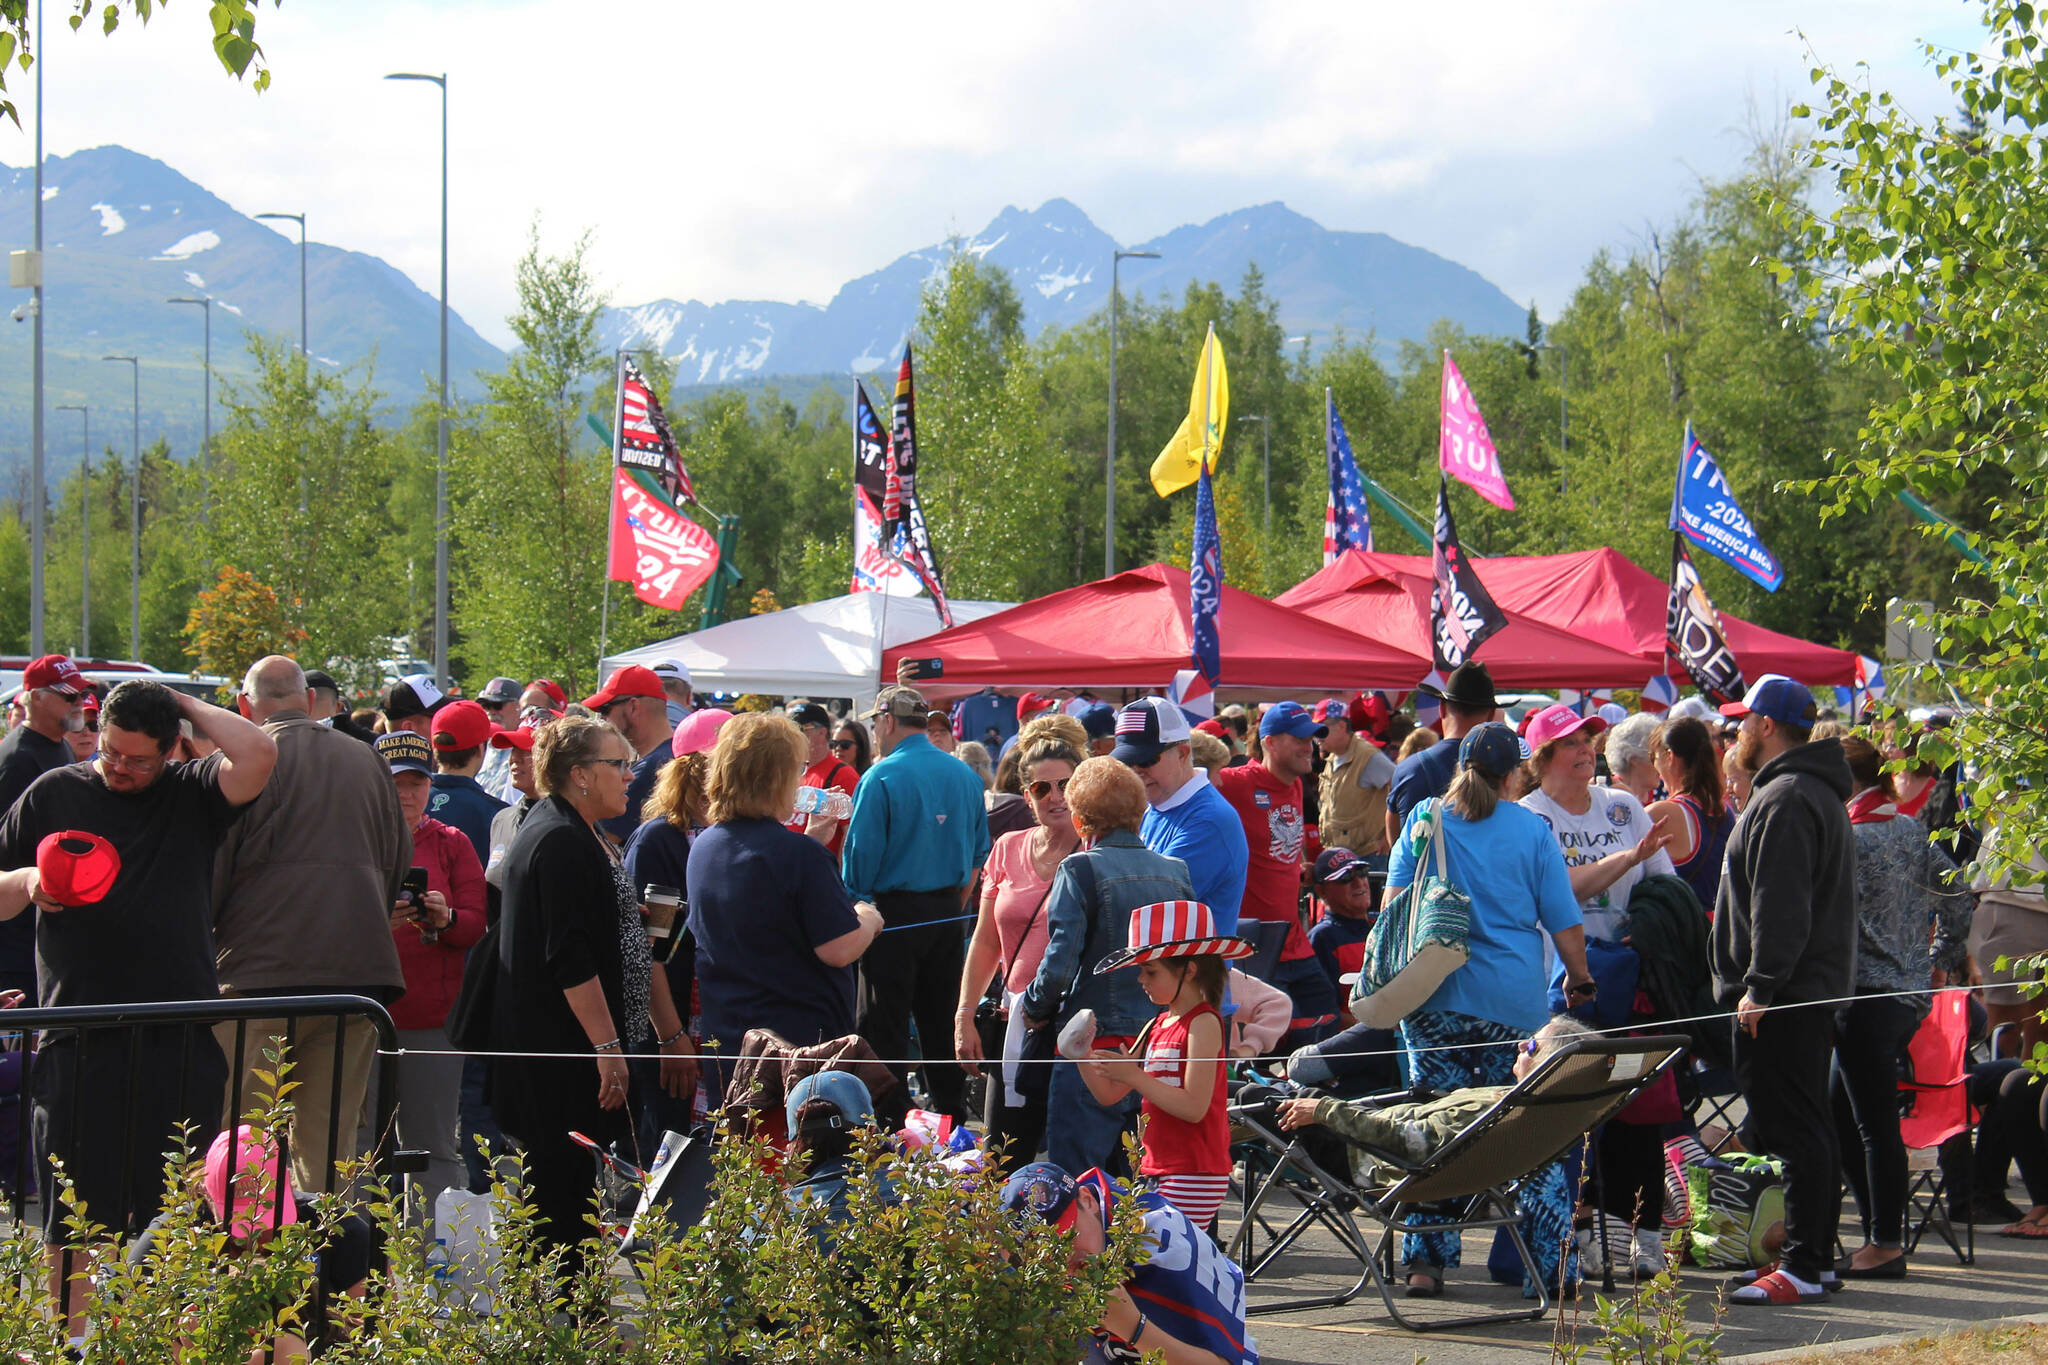 People gather outside of the Alaska Airlines Center, where a Save America rally was being held, on Saturday, July 9, 2022 in Anchorage, Alaska. Former President Donald Trump, U.S. Senate candidate Kelly Tshibaka and U.S. House candidate Sarah Palin were among the event’s speakers. (Ashlyn O’Hara/Peninsula Clarion)